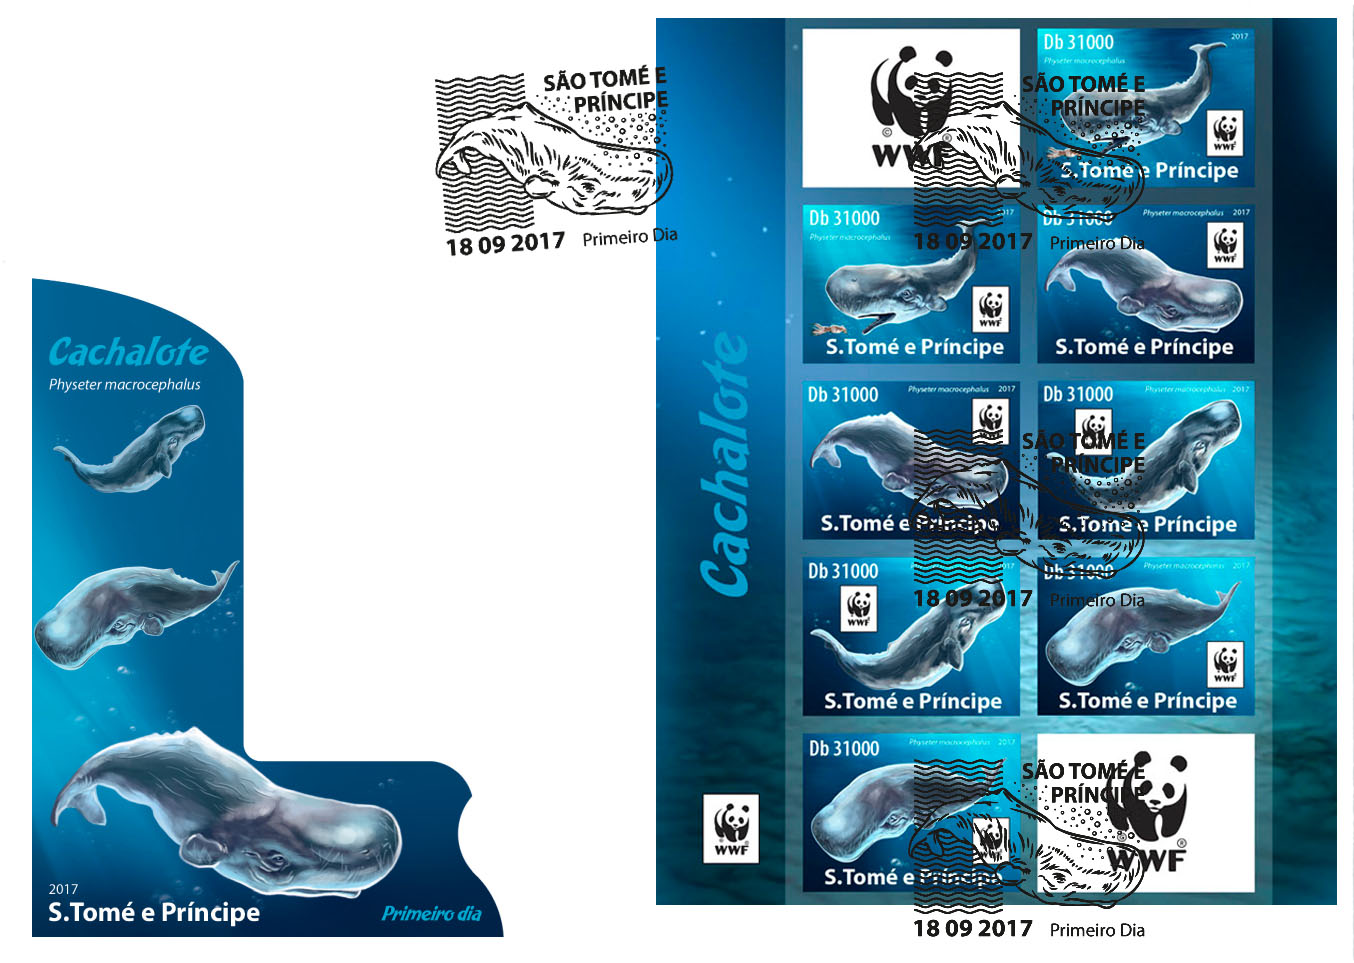 WWF – Sperm whale (FDC imperf.) - Issue of Sao Tome and Principe postage stamps